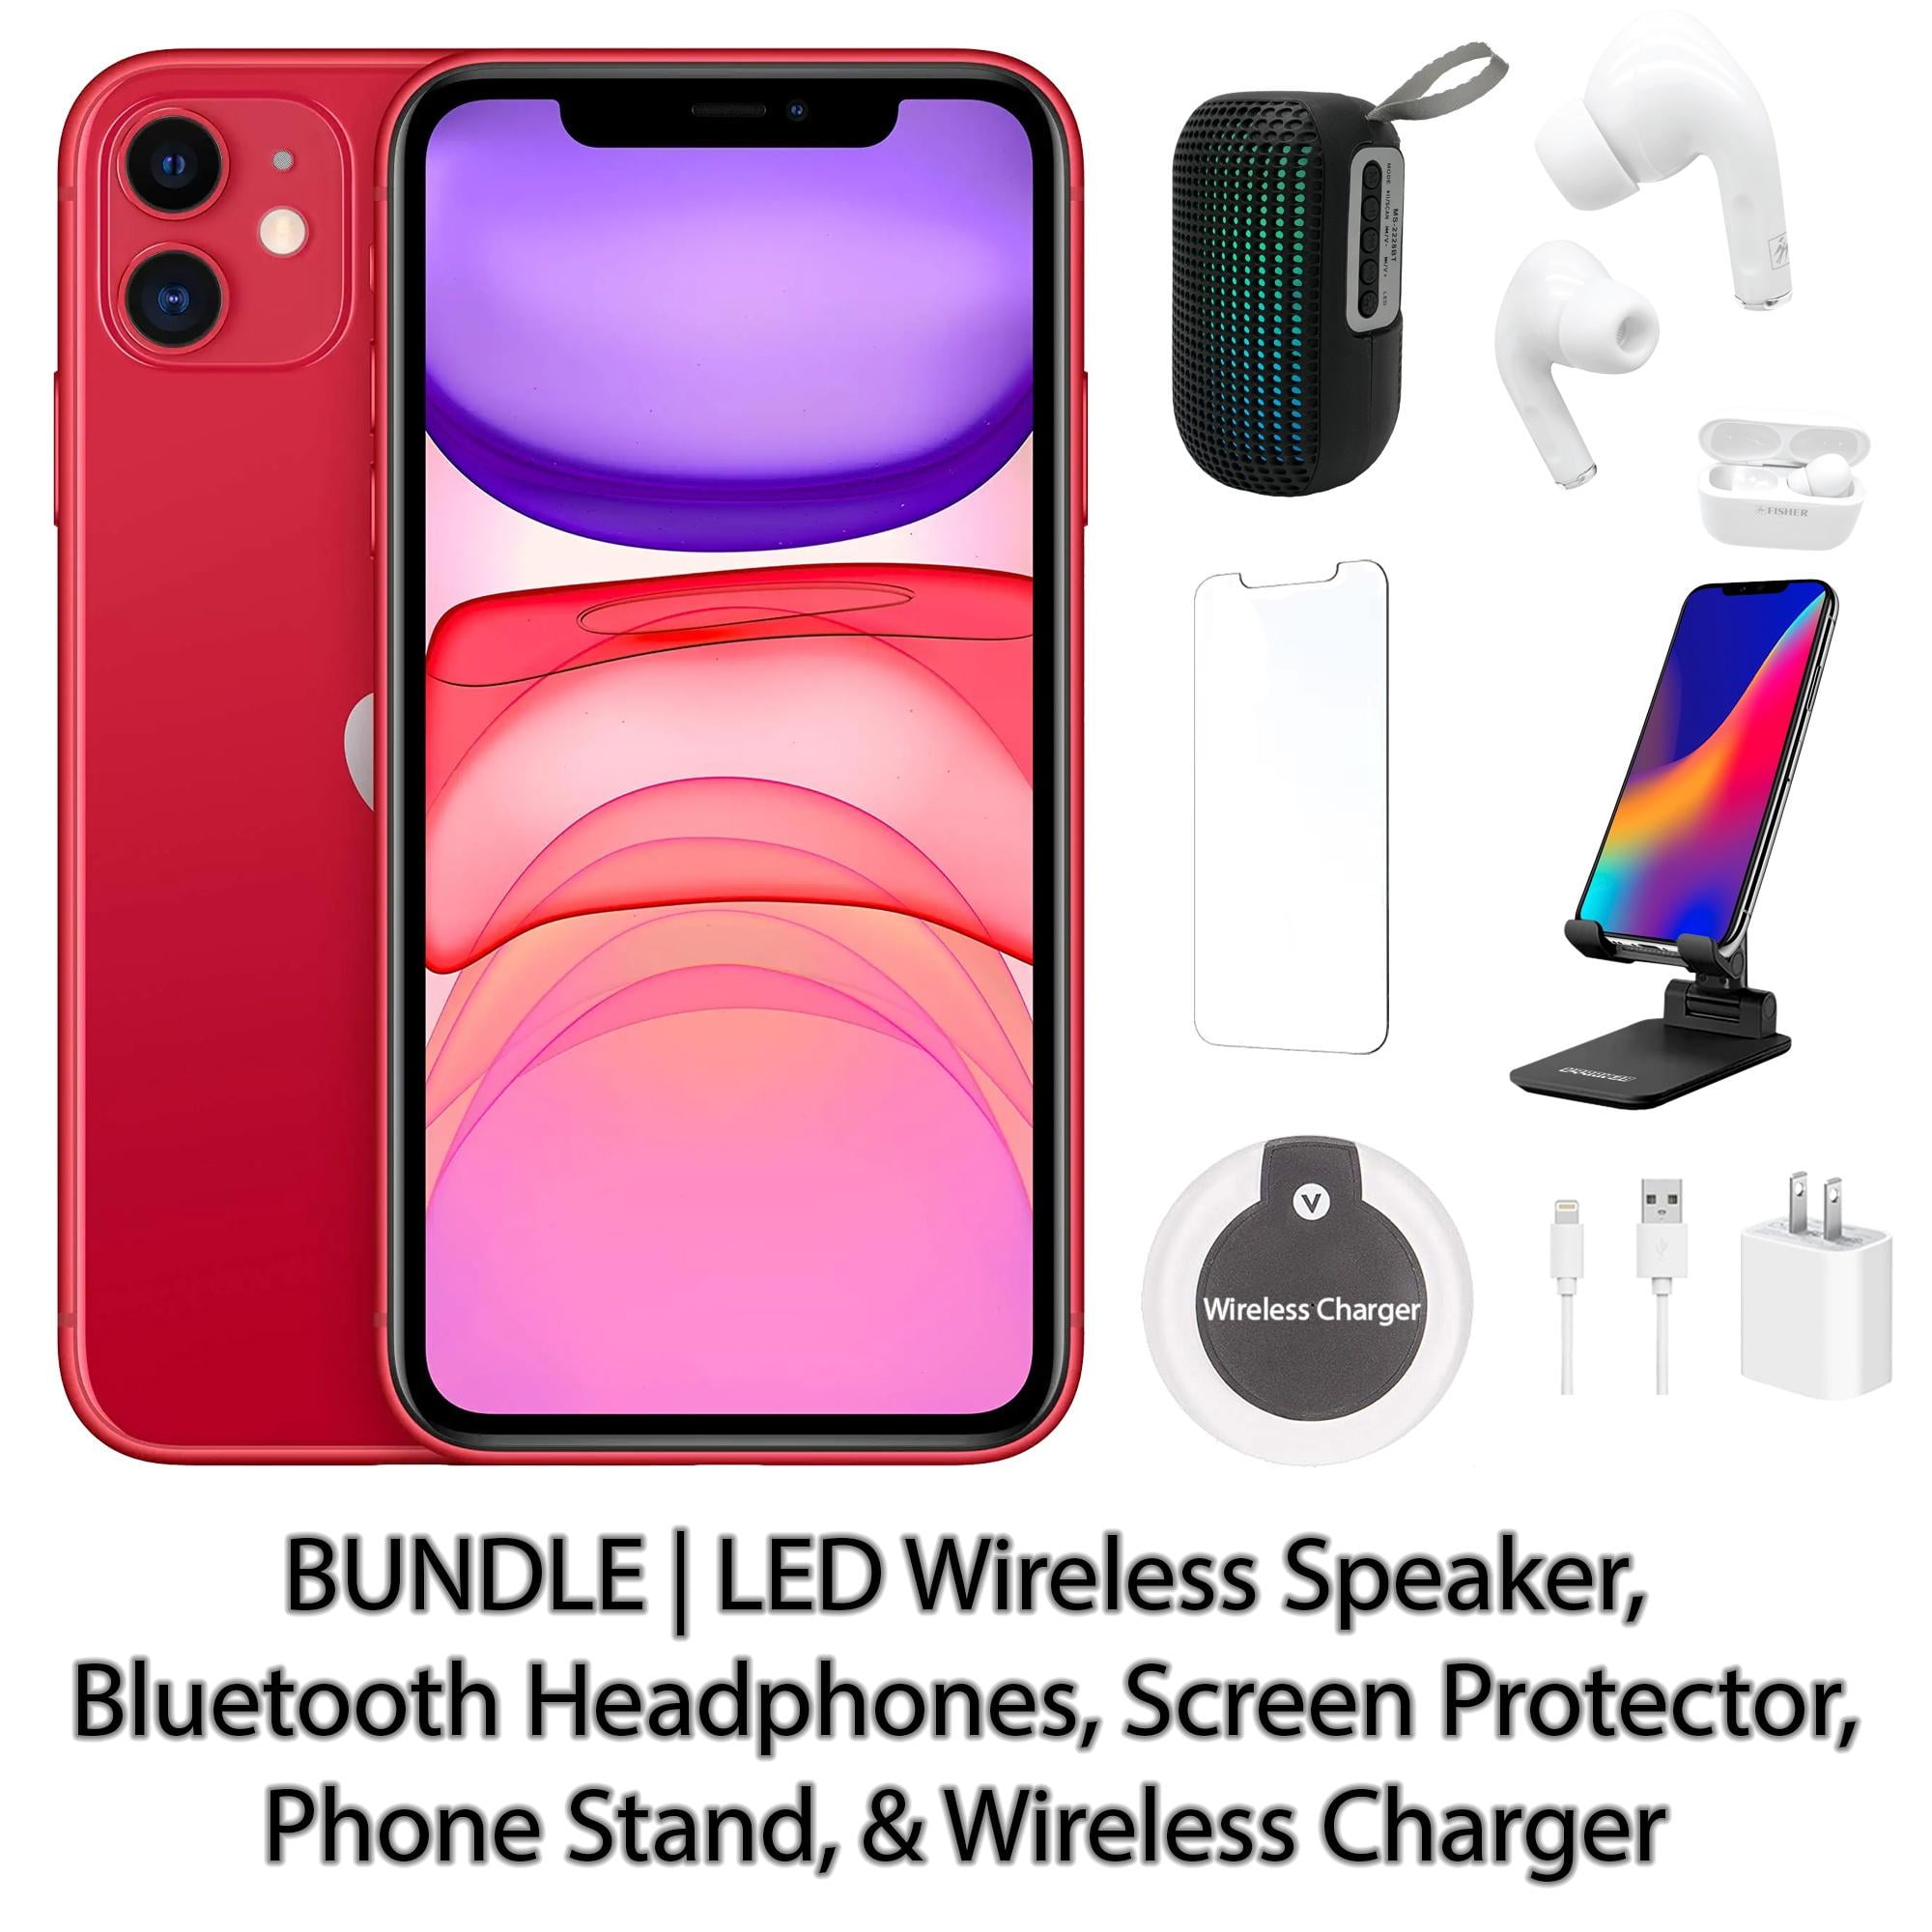 iPhone 11 64GB Red - Refurbished product